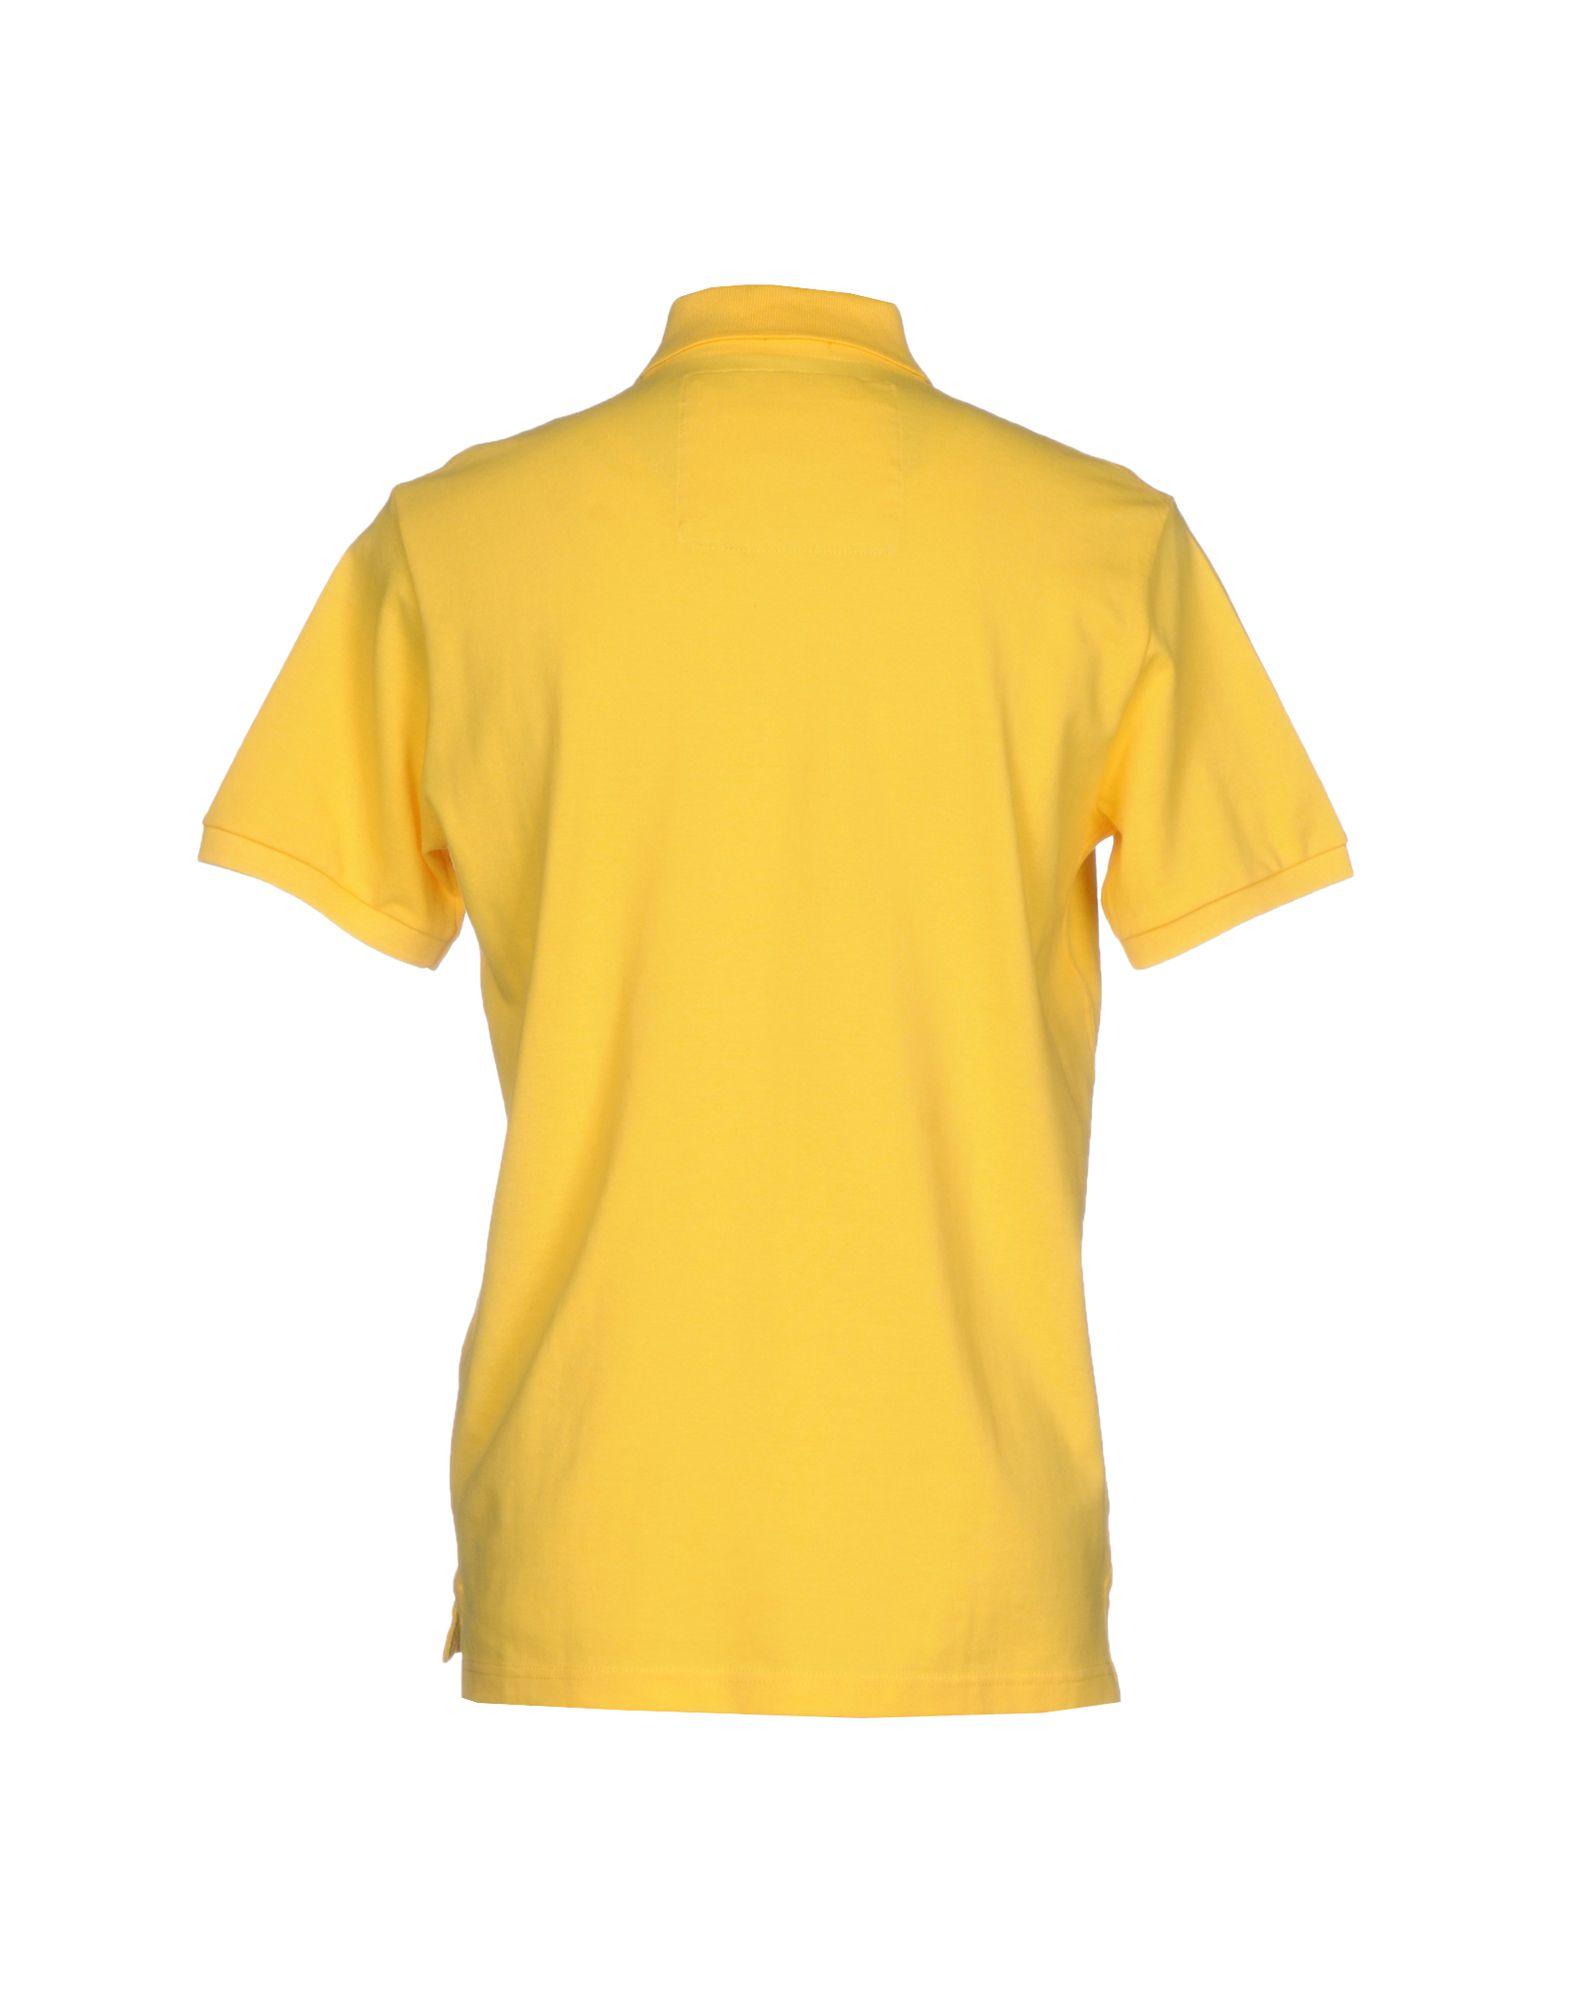 Lyst - Tommy hilfiger Polo Shirt in Yellow for Men